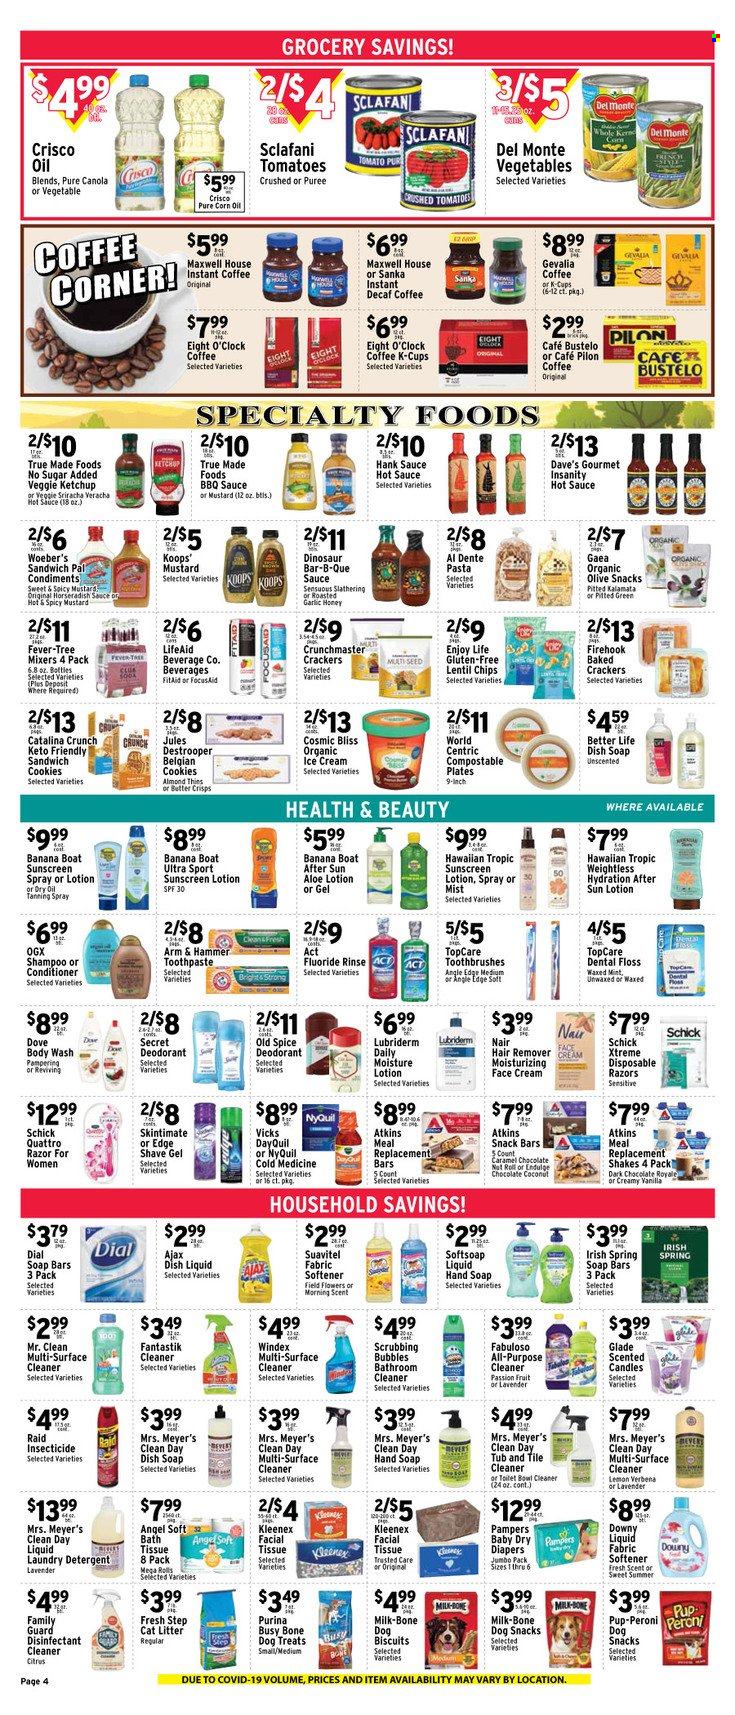 thumbnail - Met Foodmarkets Flyer - 05/21/2023 - 05/27/2023 - Sales products - horseradish, perch, sandwich, pasta, sauce, milk, sandwich cookies, ice cream, cookies, Dove, snack, crackers, dark chocolate, snack bar, chips, Thins, ARM & HAMMER, Crisco, crushed tomatoes, Del Monte, BBQ sauce, caramel, mustard, sriracha, hot sauce, ketchup, corn oil, honey, soda, Maxwell House, coffee, instant coffee, K-Cups, Gevalia, Eight O'Clock, beer. Page 4.